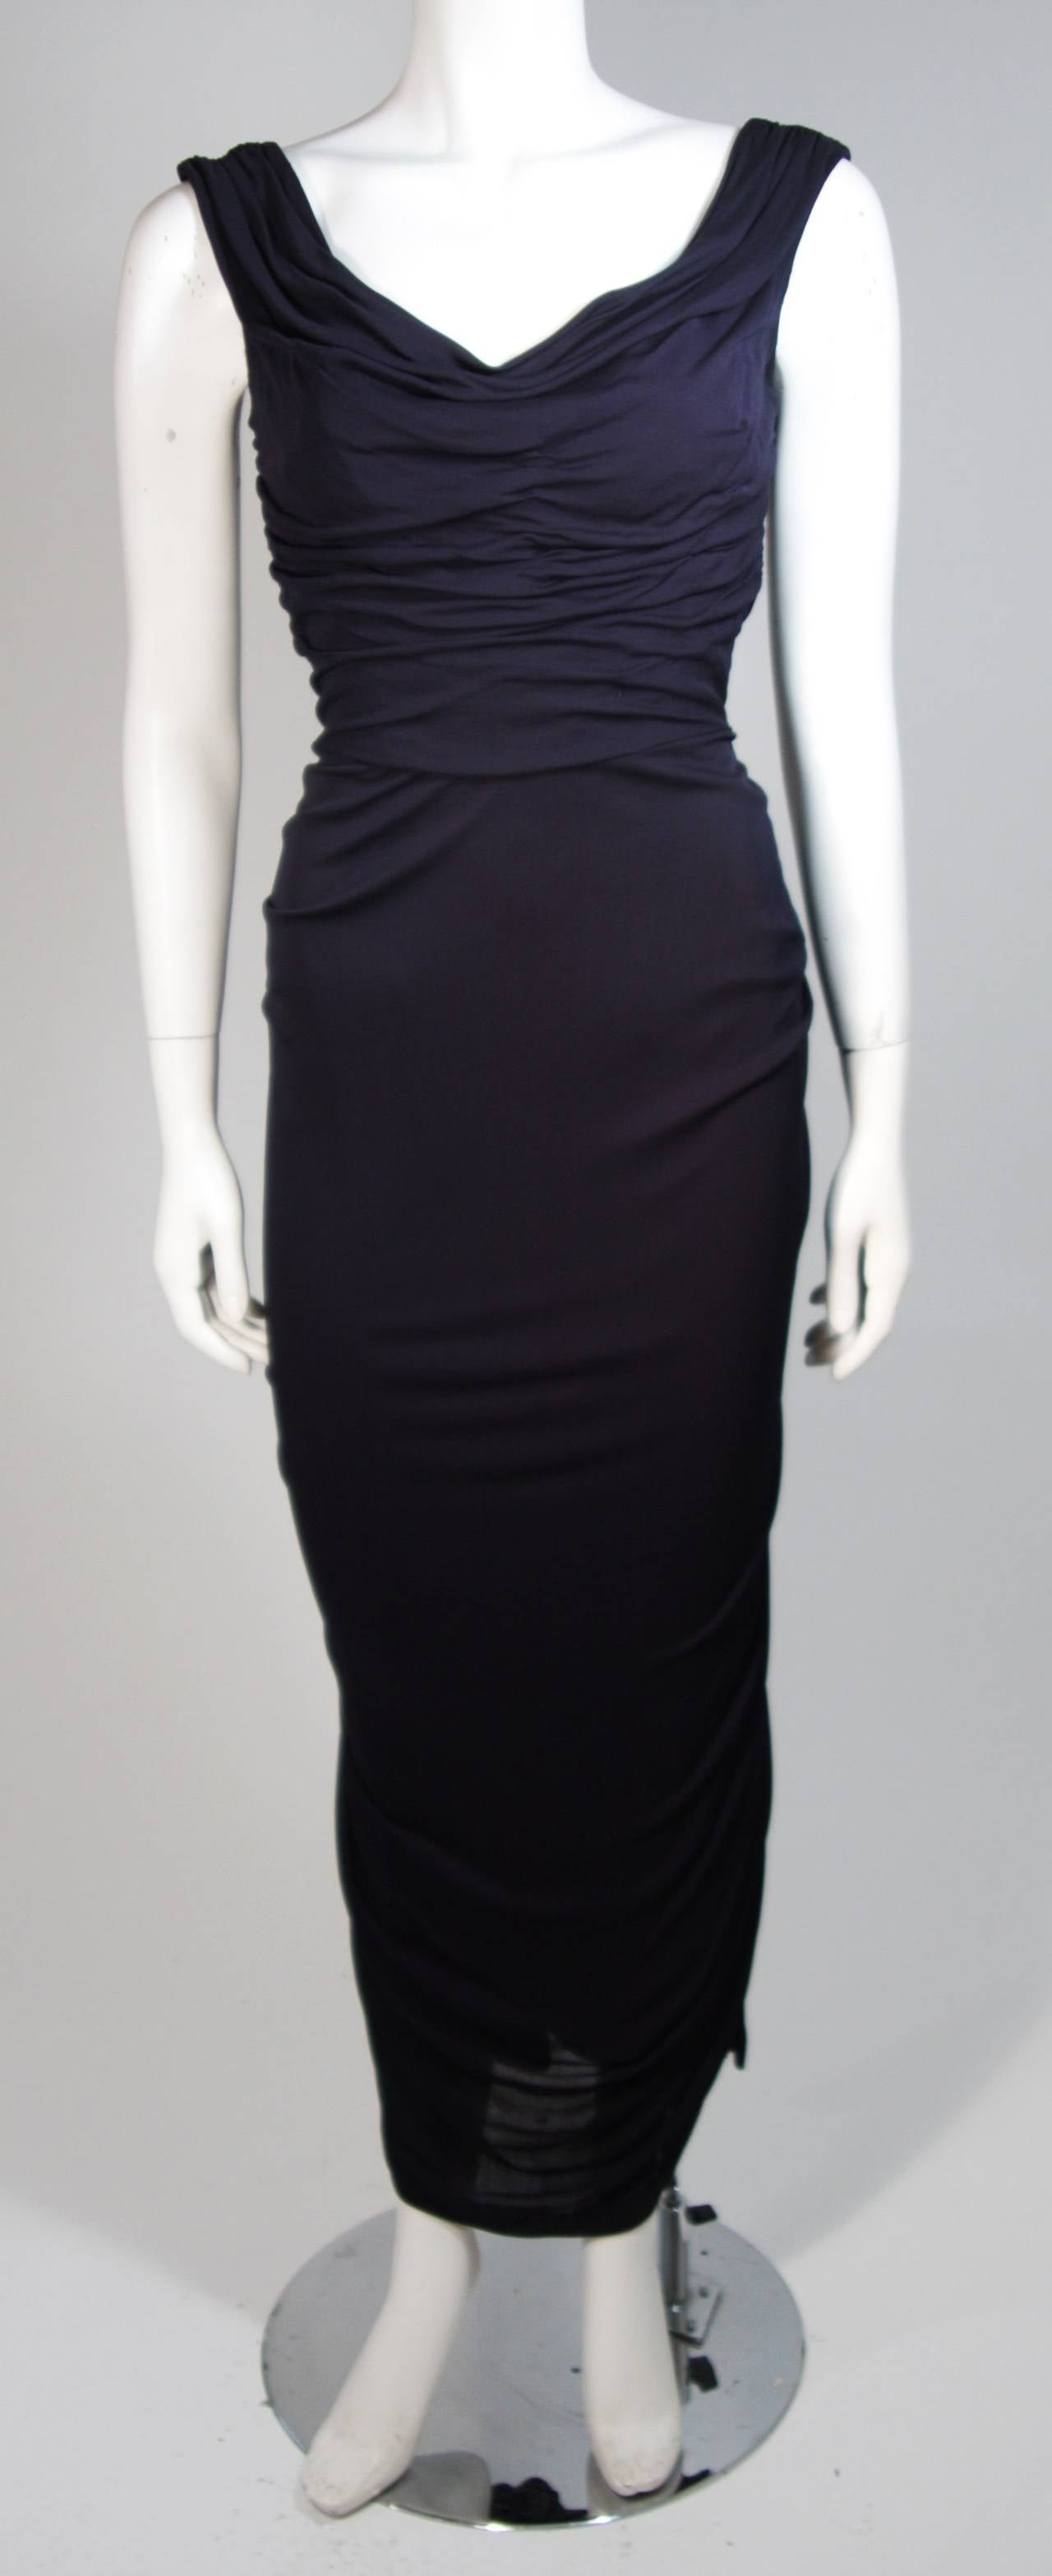 This Ceil Chapman gown is composed of a navy jersey. The dress features draping and straps which can be styled on or off the shoulders. There is a center back drape as well and a zipper closure. In excellent vintage condition. Beautiful for design